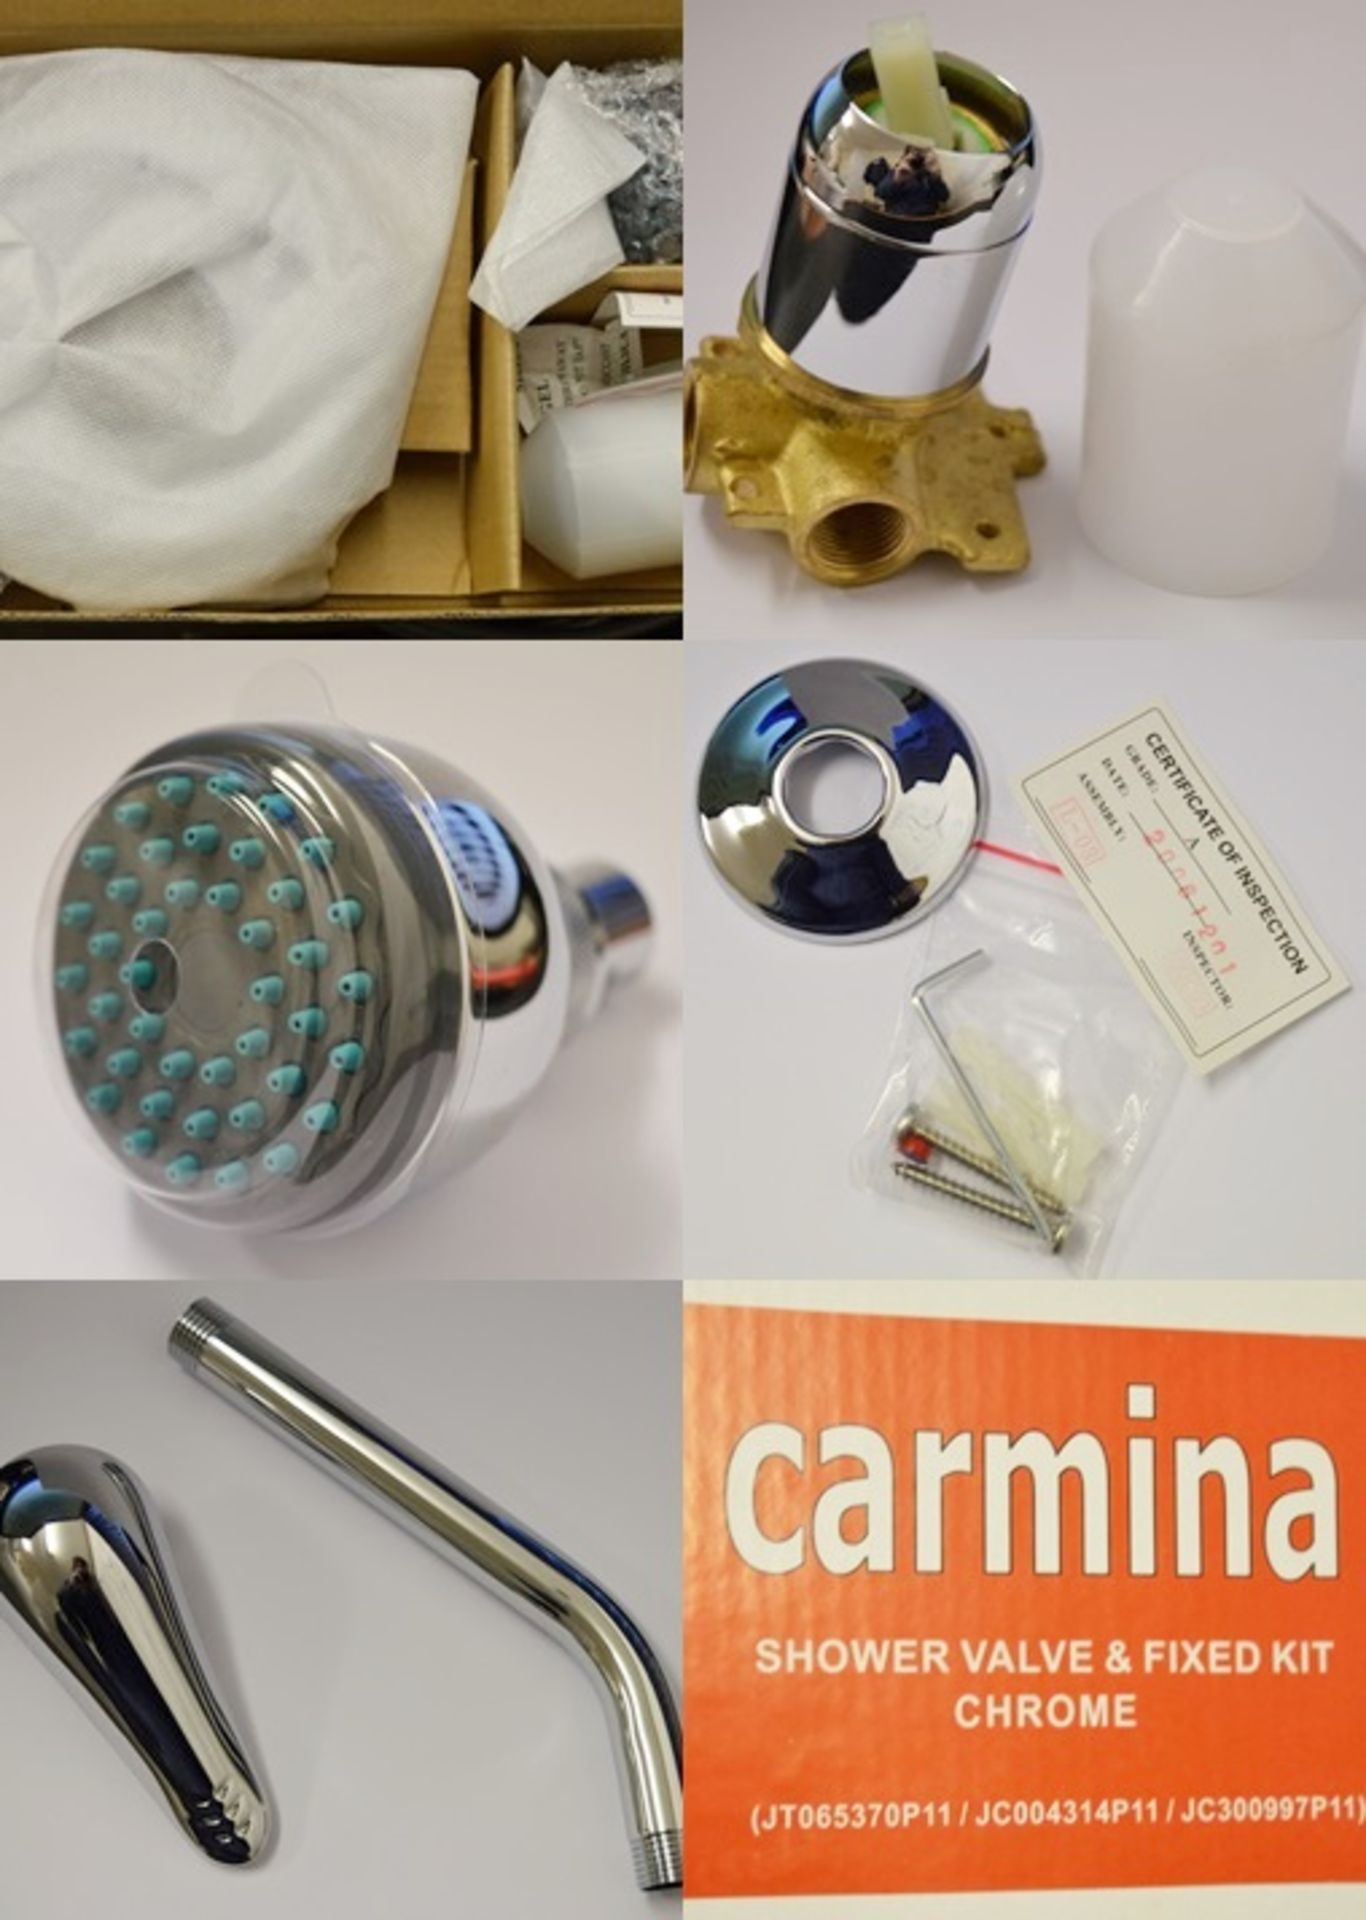 1 x Carmina Shower Valve Kit - Contains Chrome Shower Head, Fixed Arm and Manual Control - Brass - Image 2 of 13